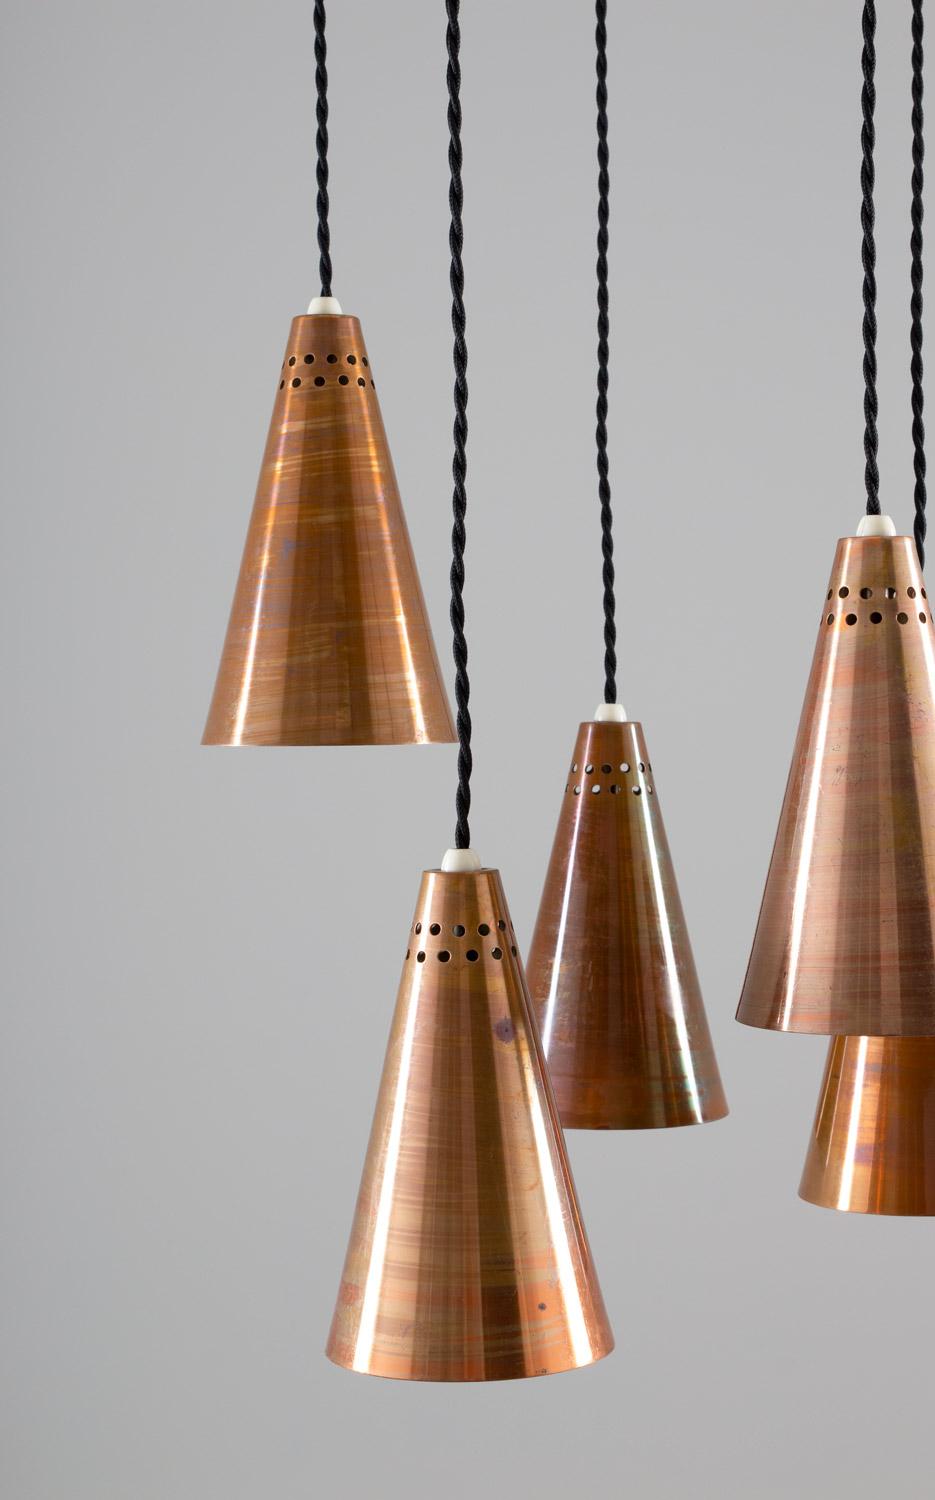 20th Century Scandinavian Midcentury Pendant in Copper by Hans-Agne Jakobsson For Sale